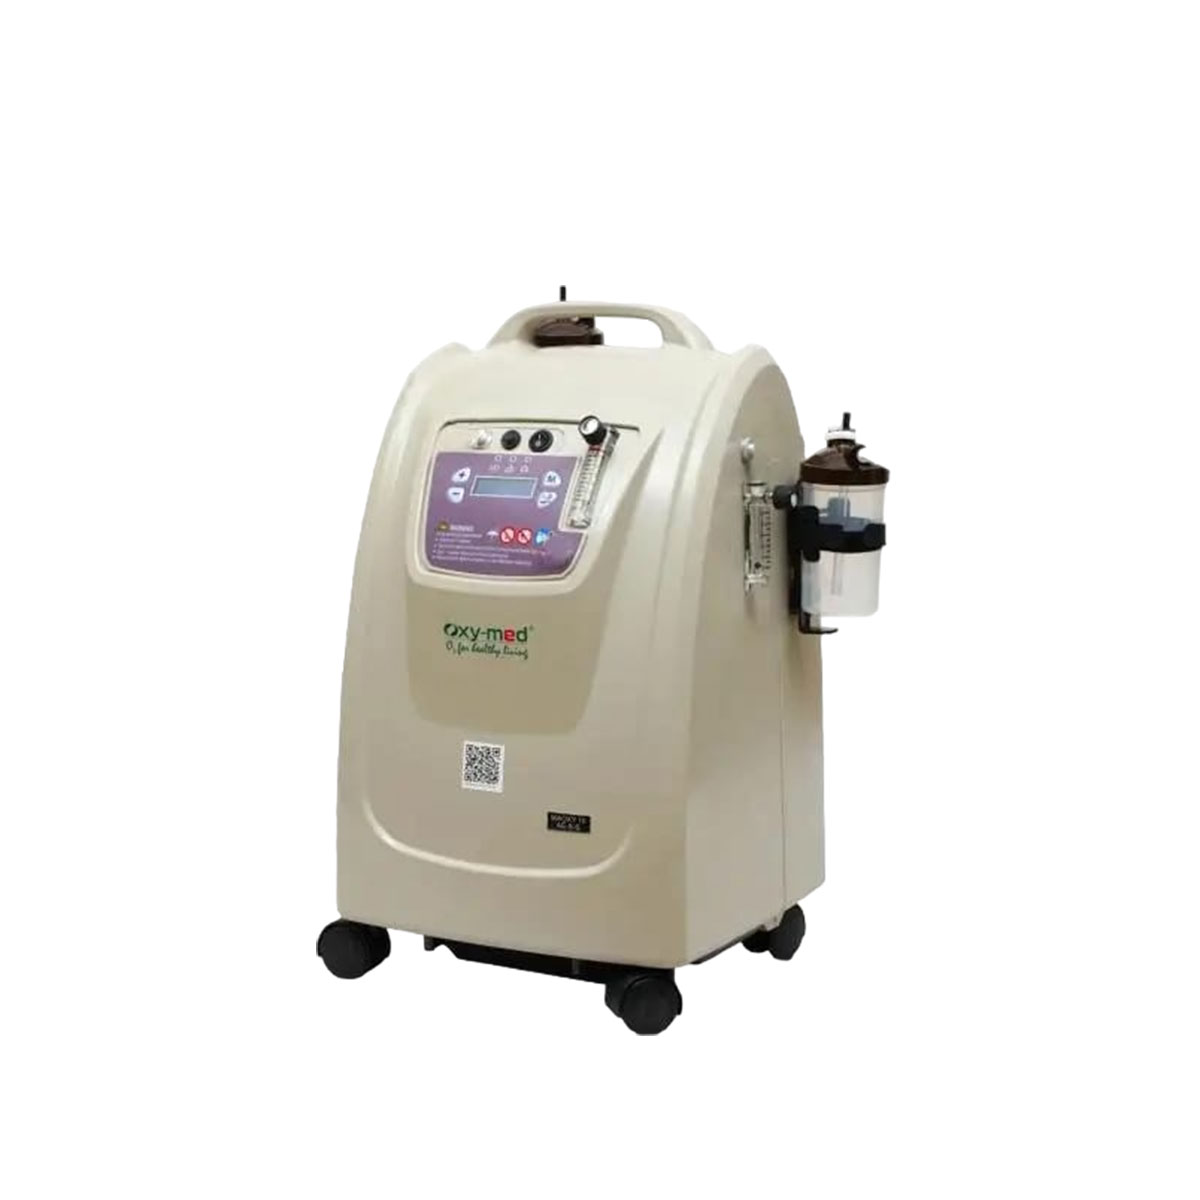 10 Lpm Oxymed Oxygen Concentrator On Sale Suppliers, Service Provider in Chawri bazar